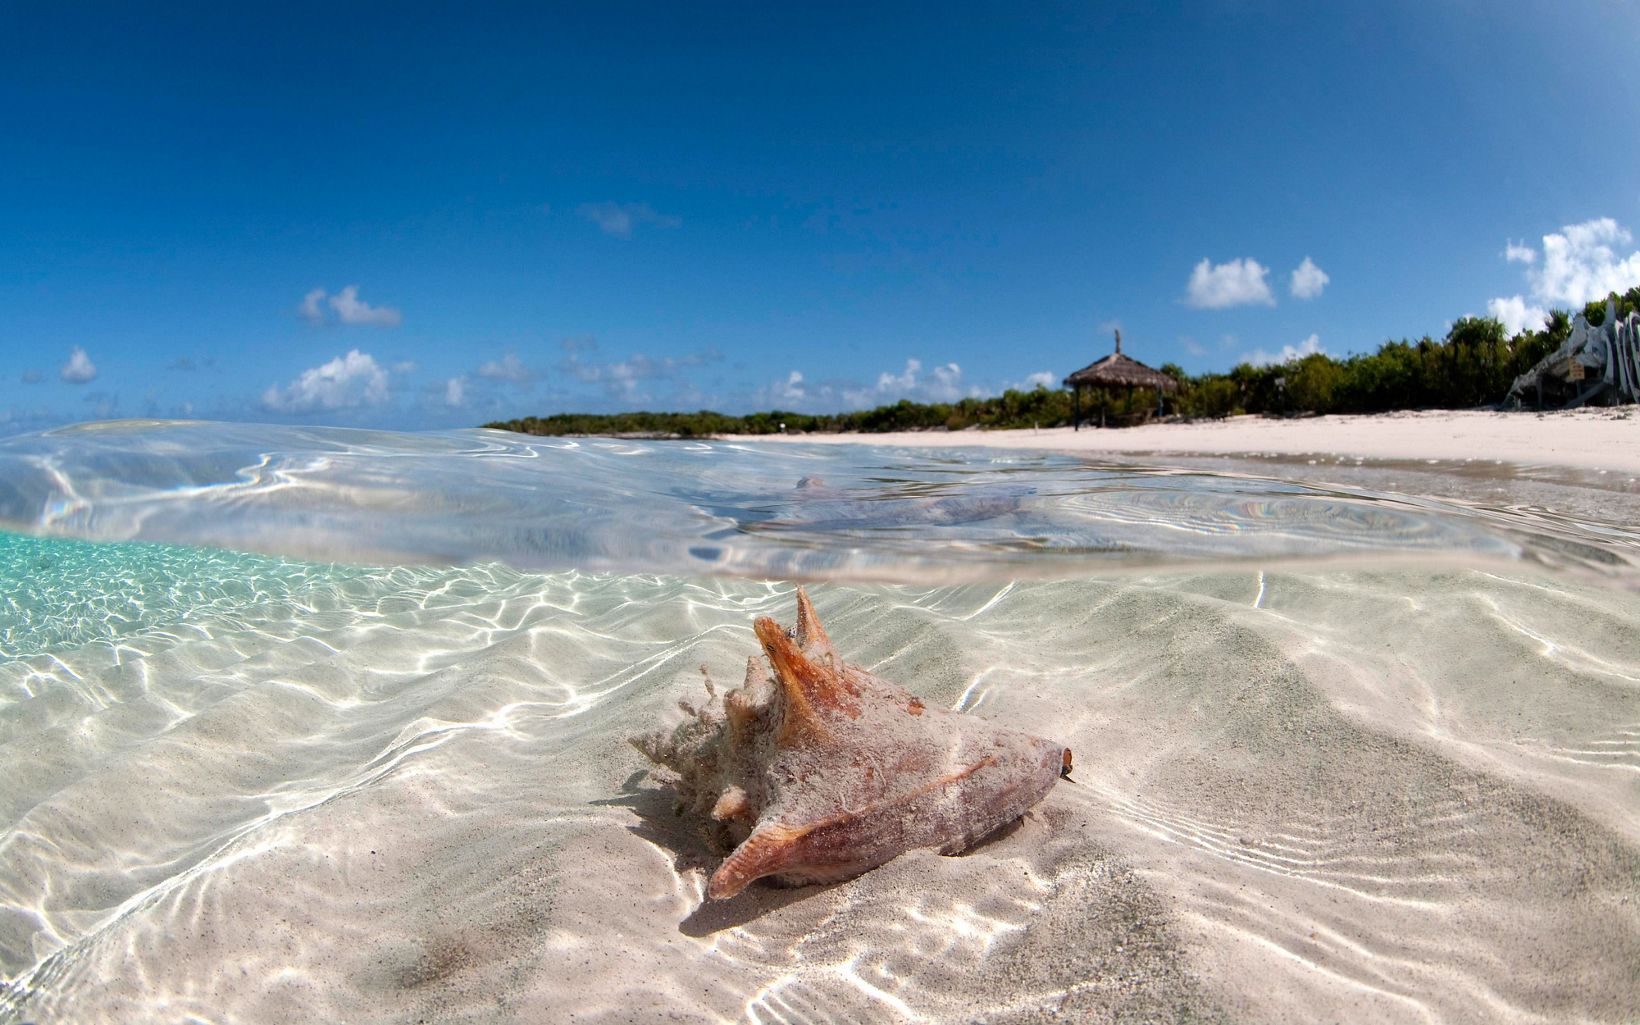 A conch rests in shallow waters of the Exuma Cays.